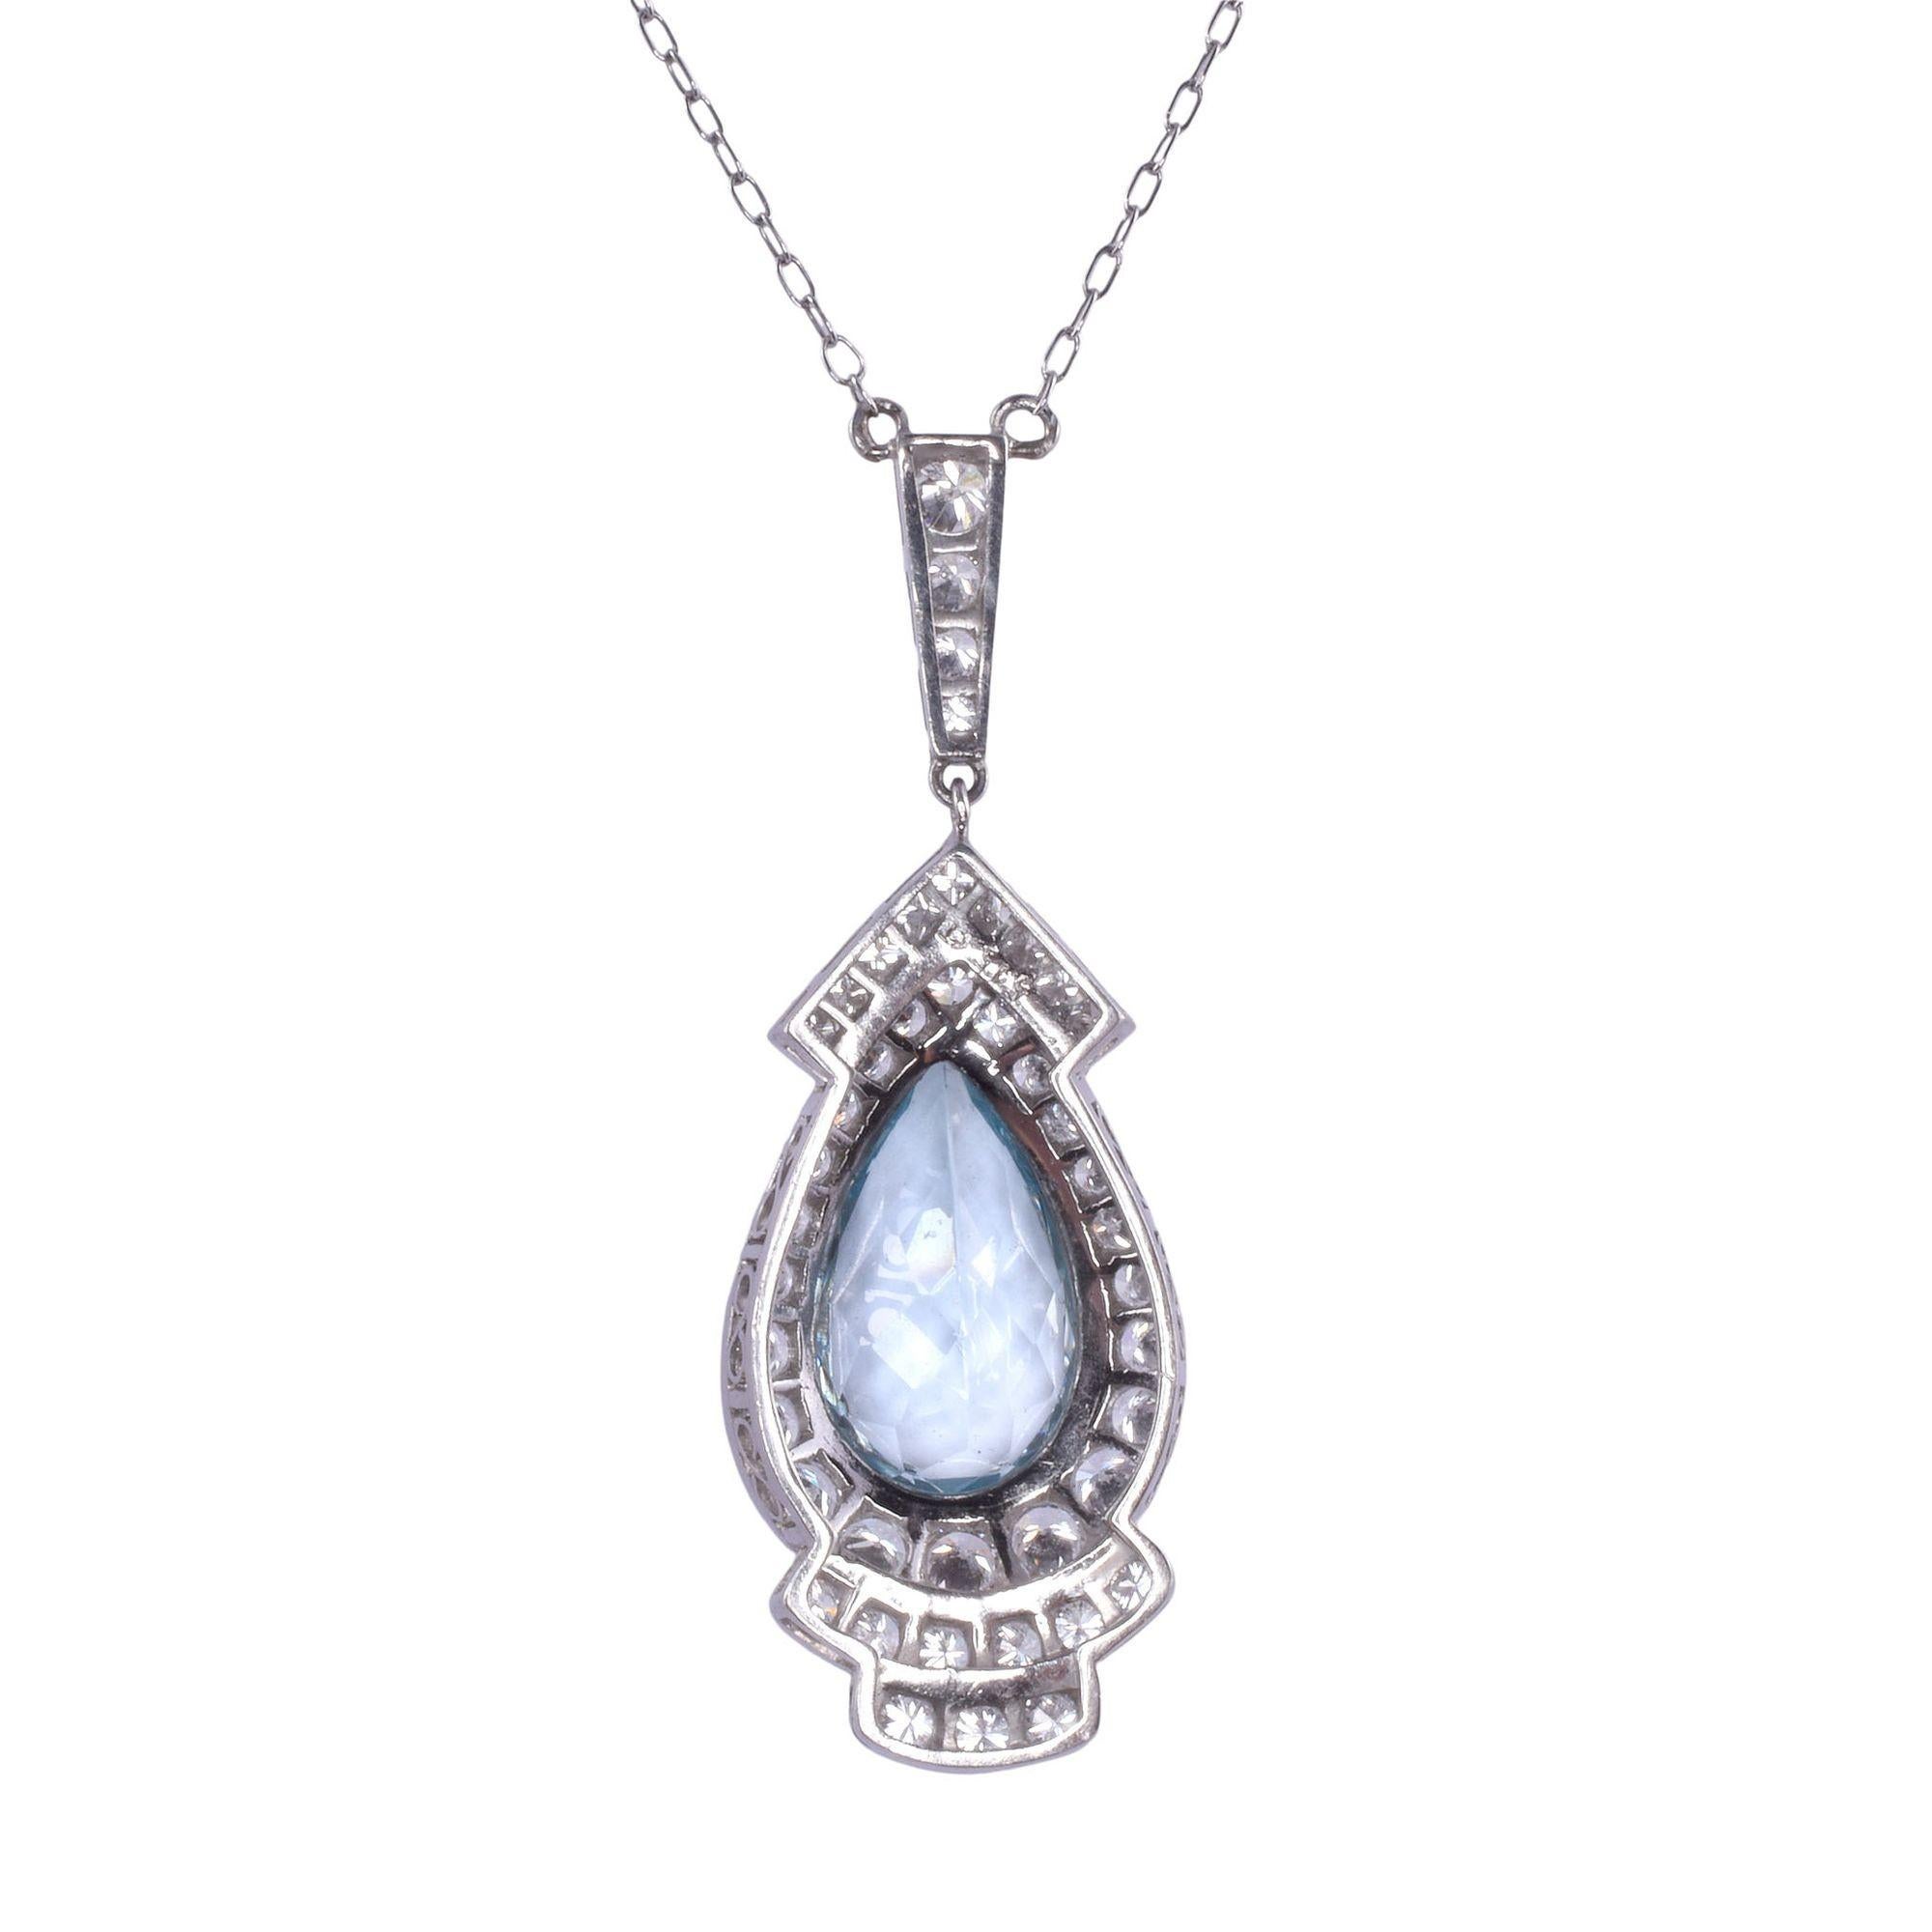 Estate Art Deco style pear aquamarine & diamond platinum necklace. This Art Deco style necklace is crafted in platinum and features a 5.15 carat pear aquamarine accented with 9 princess cut diamonds at .50 carat total weight along with 35 round